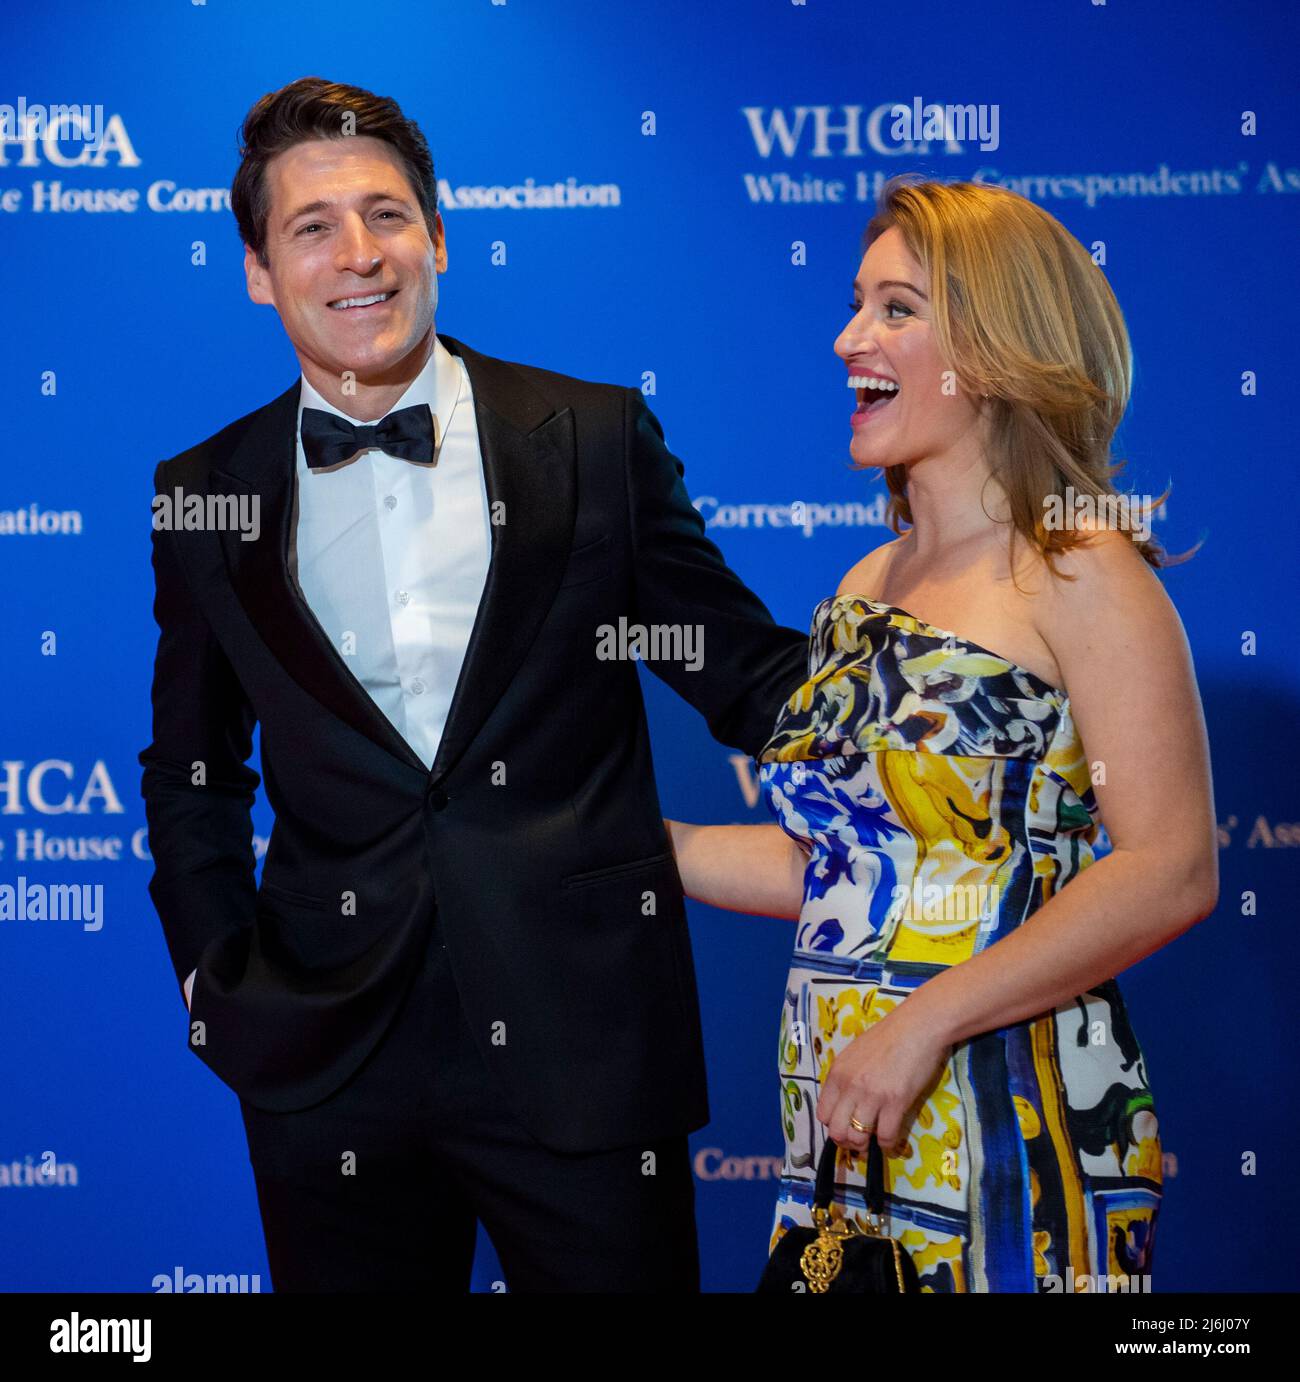 Tony Dokoupil and Katy Tur arrives for the 2022 White House Correspondents  Association Annual Dinner at the Washington Hilton Hotel on Saturday, April  30, 2022. This is the first time since 2019